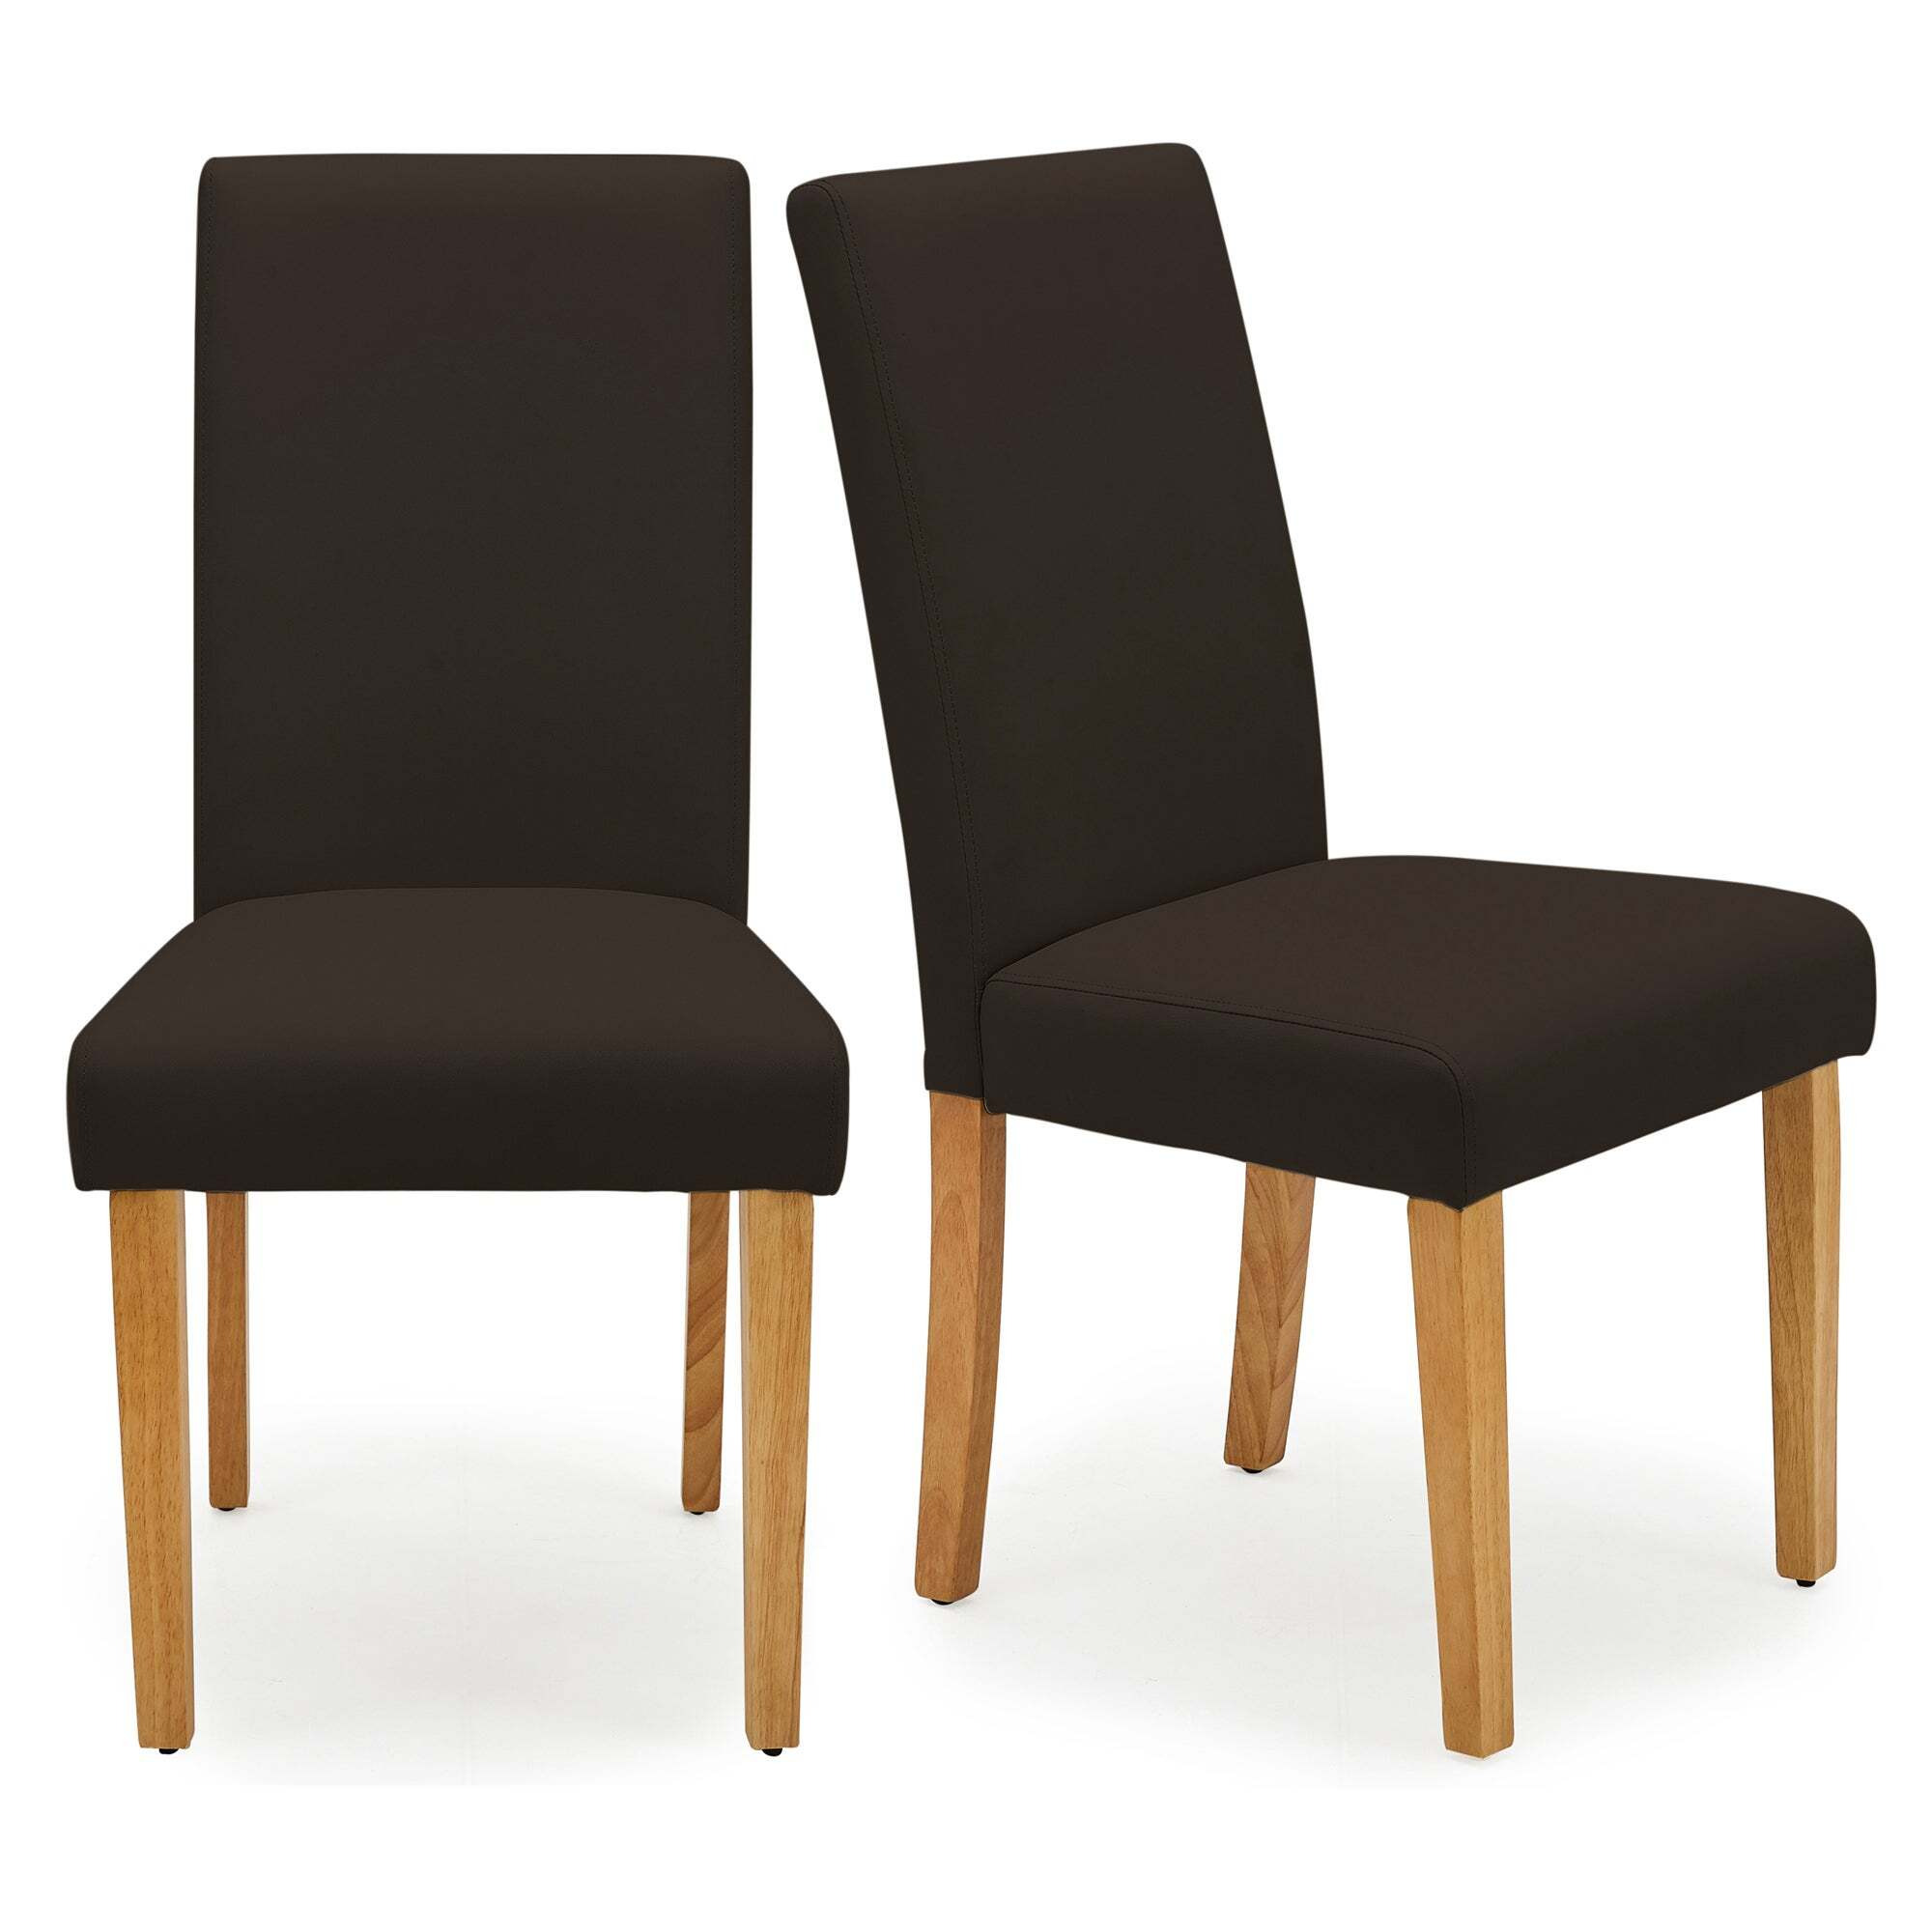 Hugo Set of 2 Dining Chairs, Faux Leather Brown